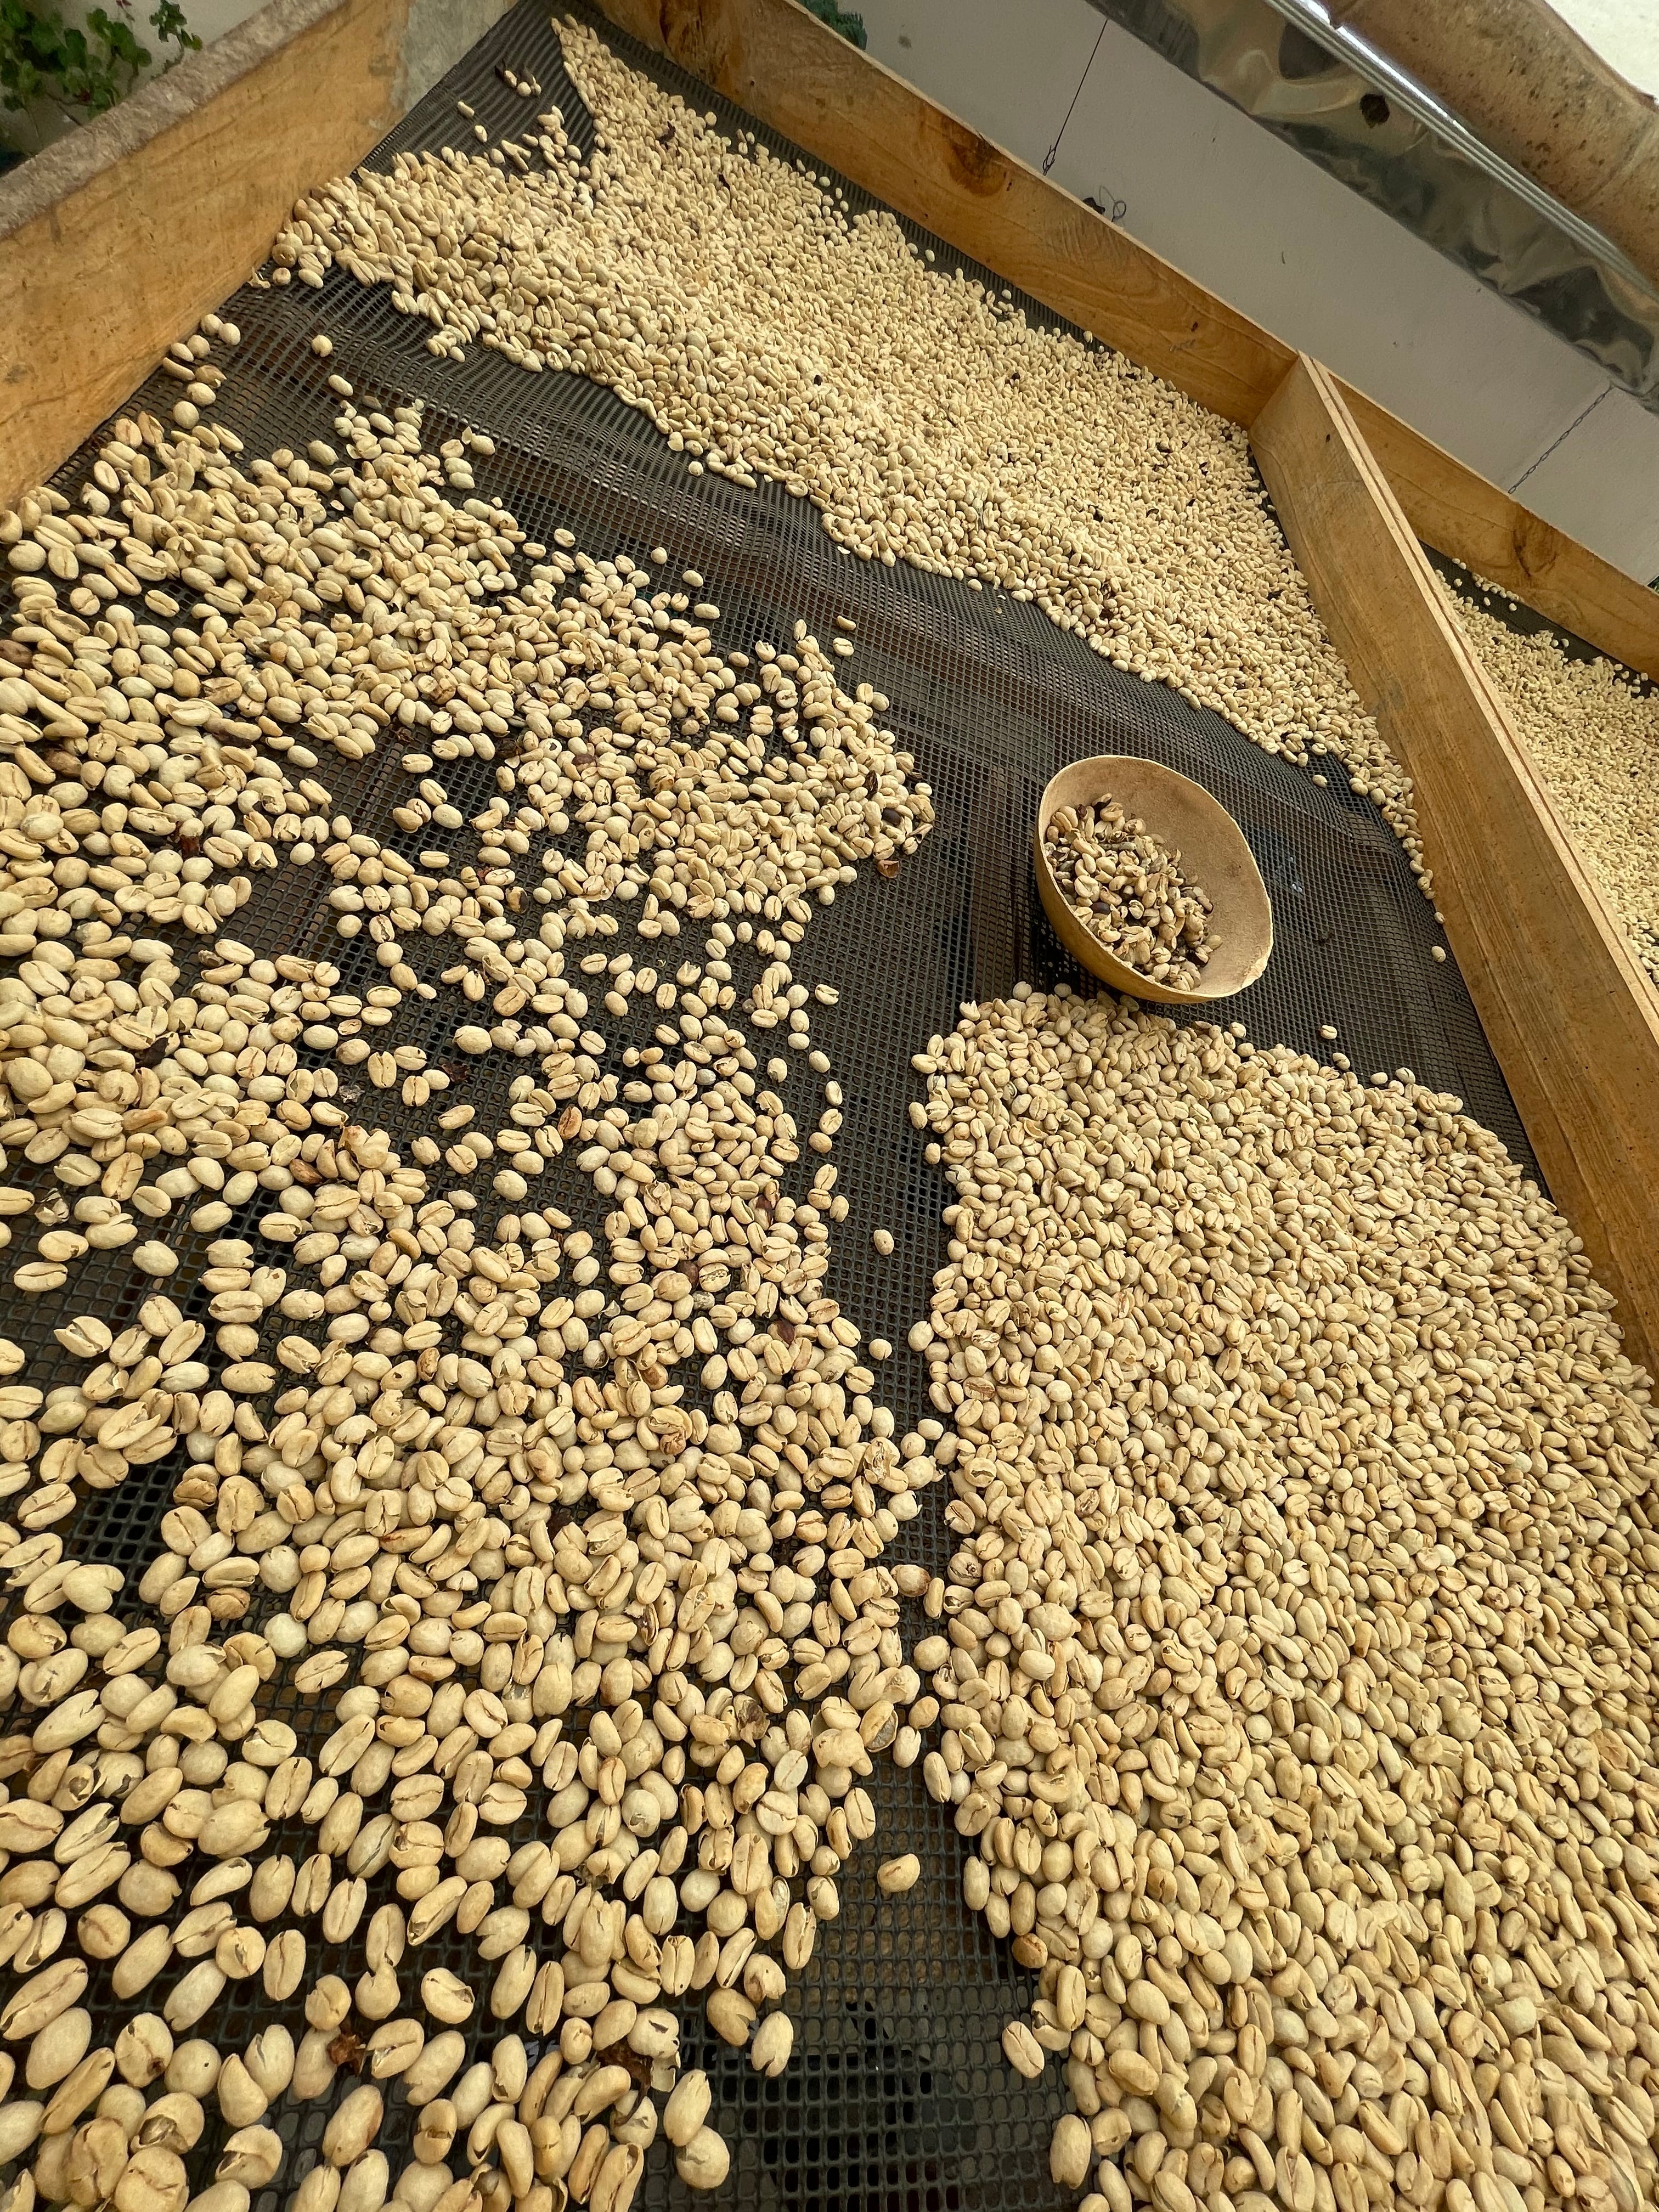 André separating damaged coffee beans during the drying process at Juan Pablo's farm. After a while, the coffee beans looked like peanuts to me